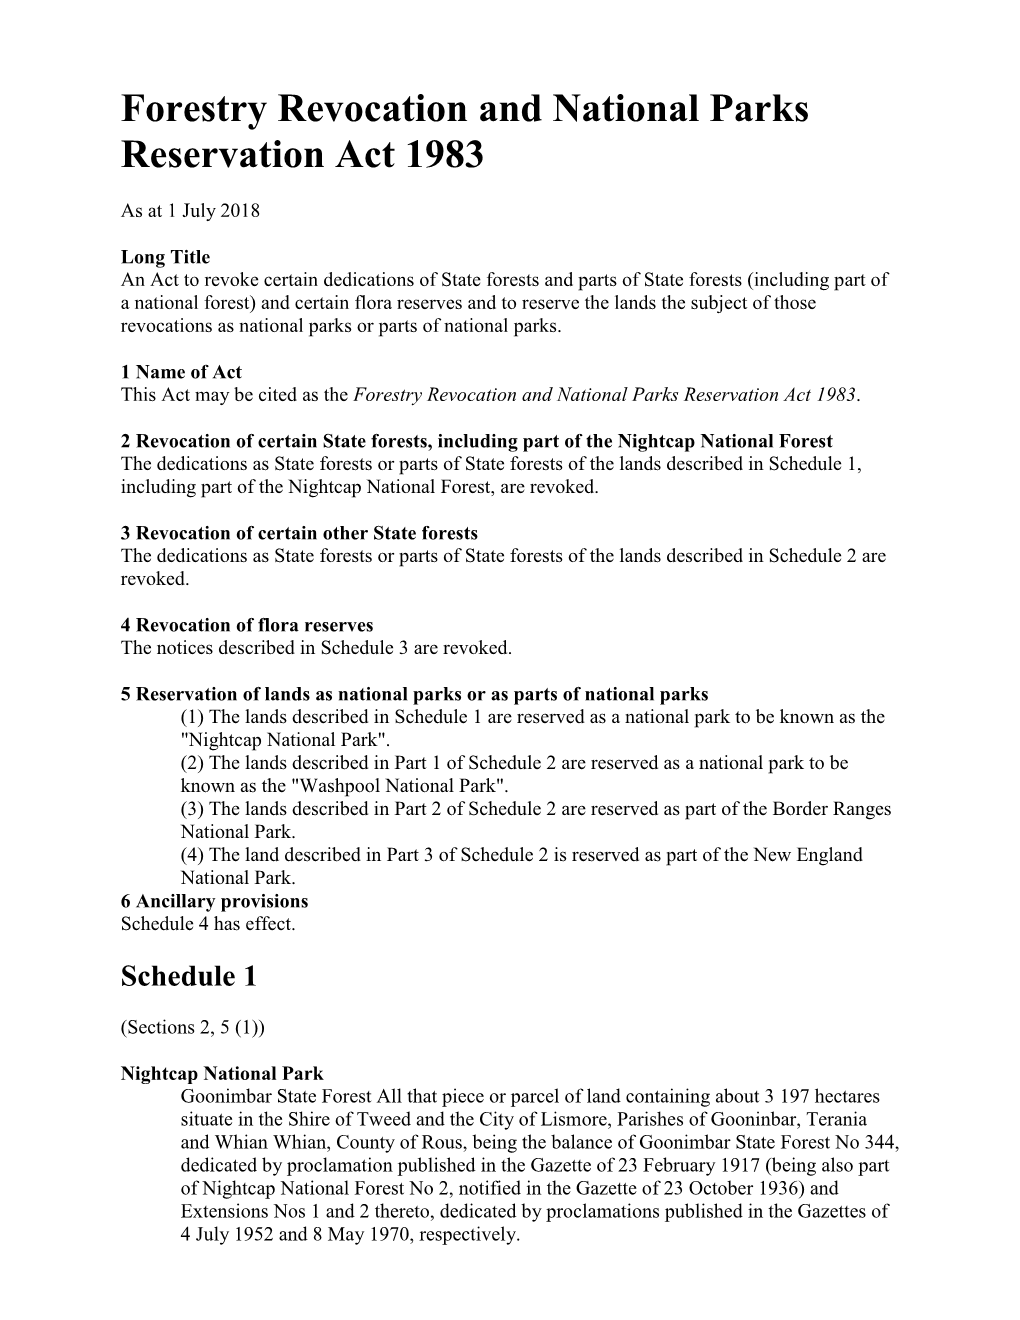 Forestry Revocation and National Parks Reservation Act 1983